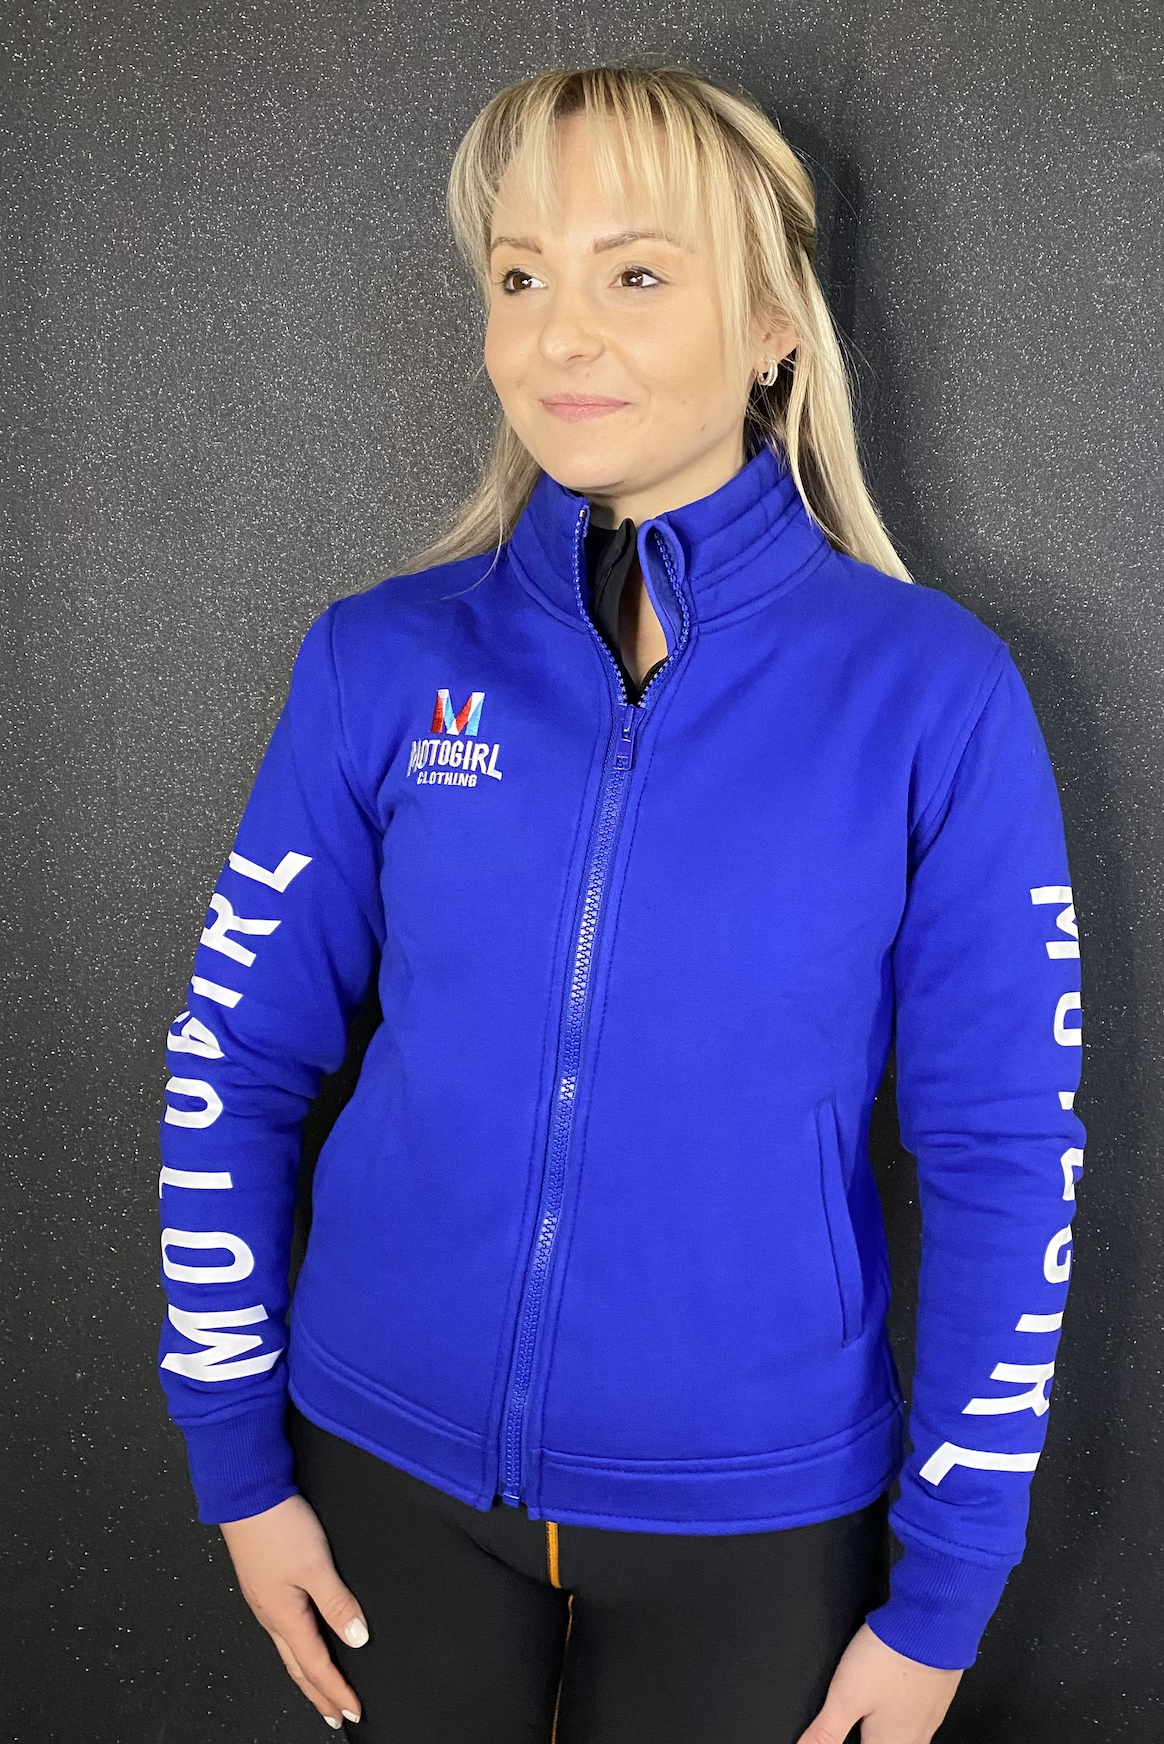 a blond woman wearing Motogirl clothing blue sweatshirt with a front zip